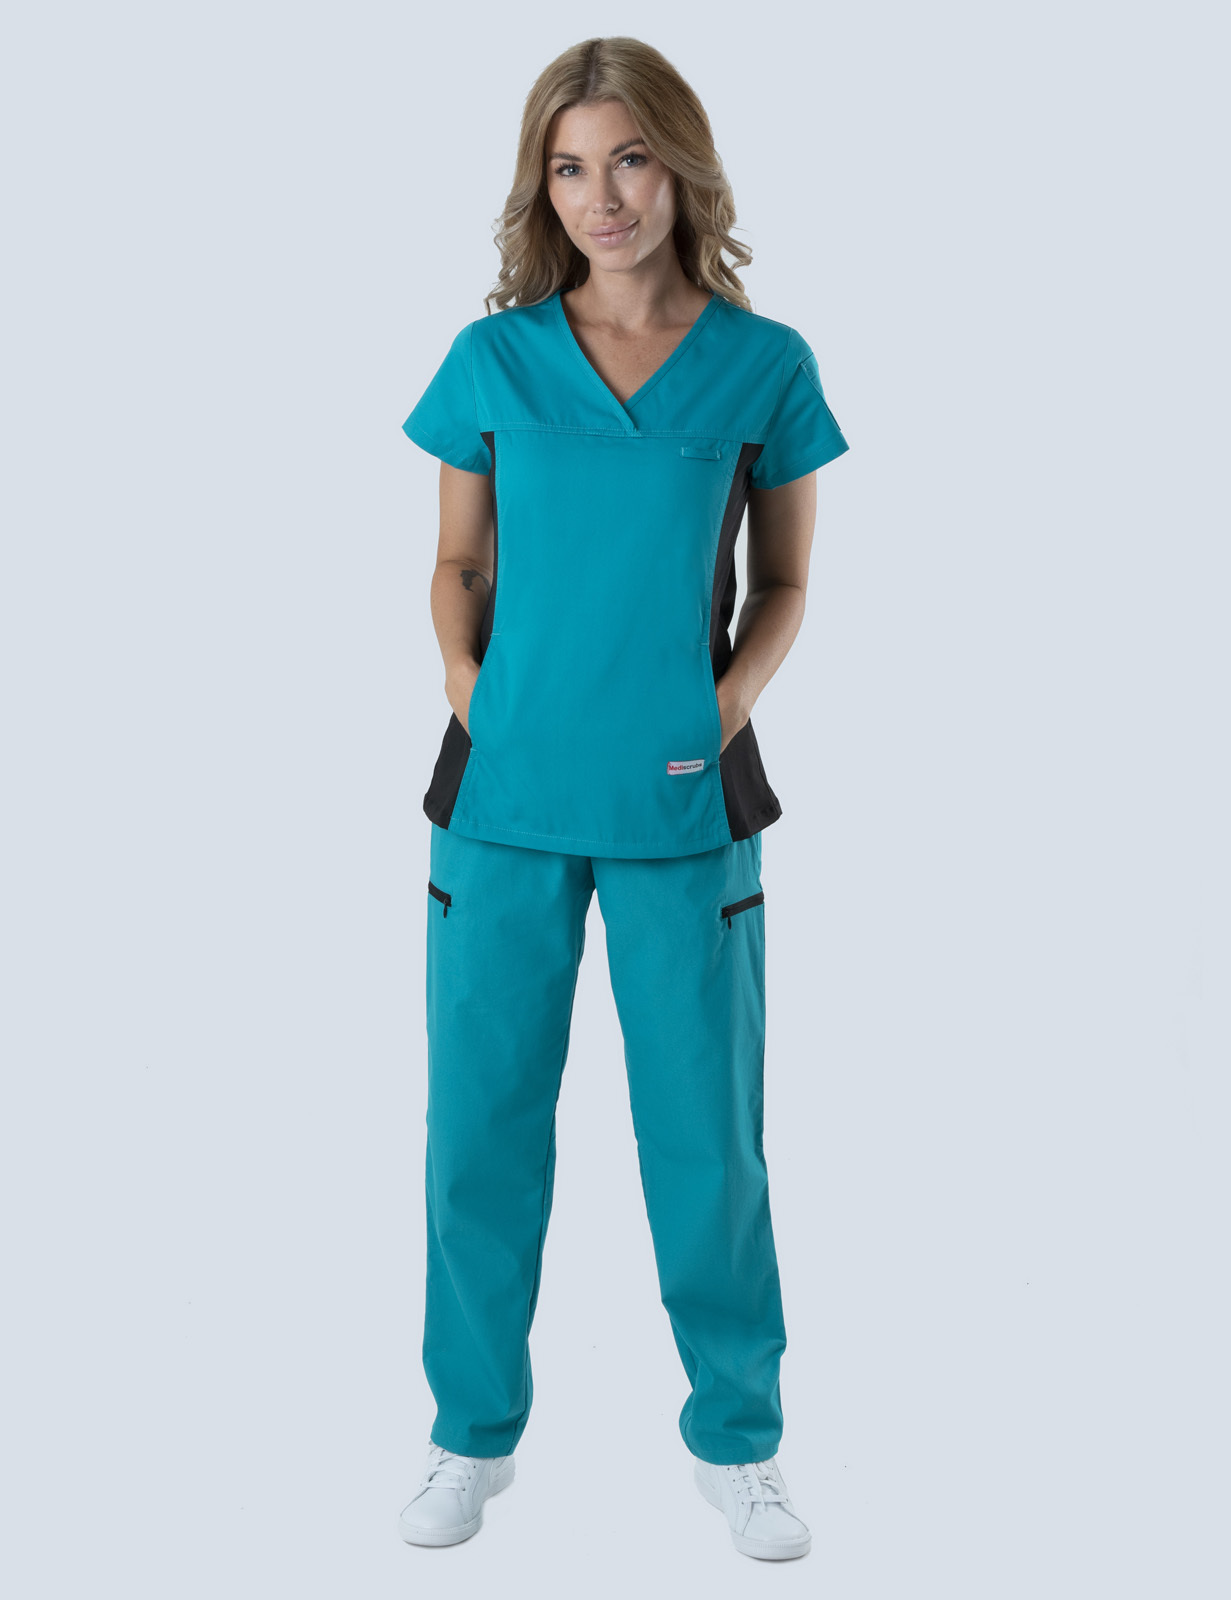 Women's Fit Solid Scrub Top With Spandex Panel - Teal - Medium